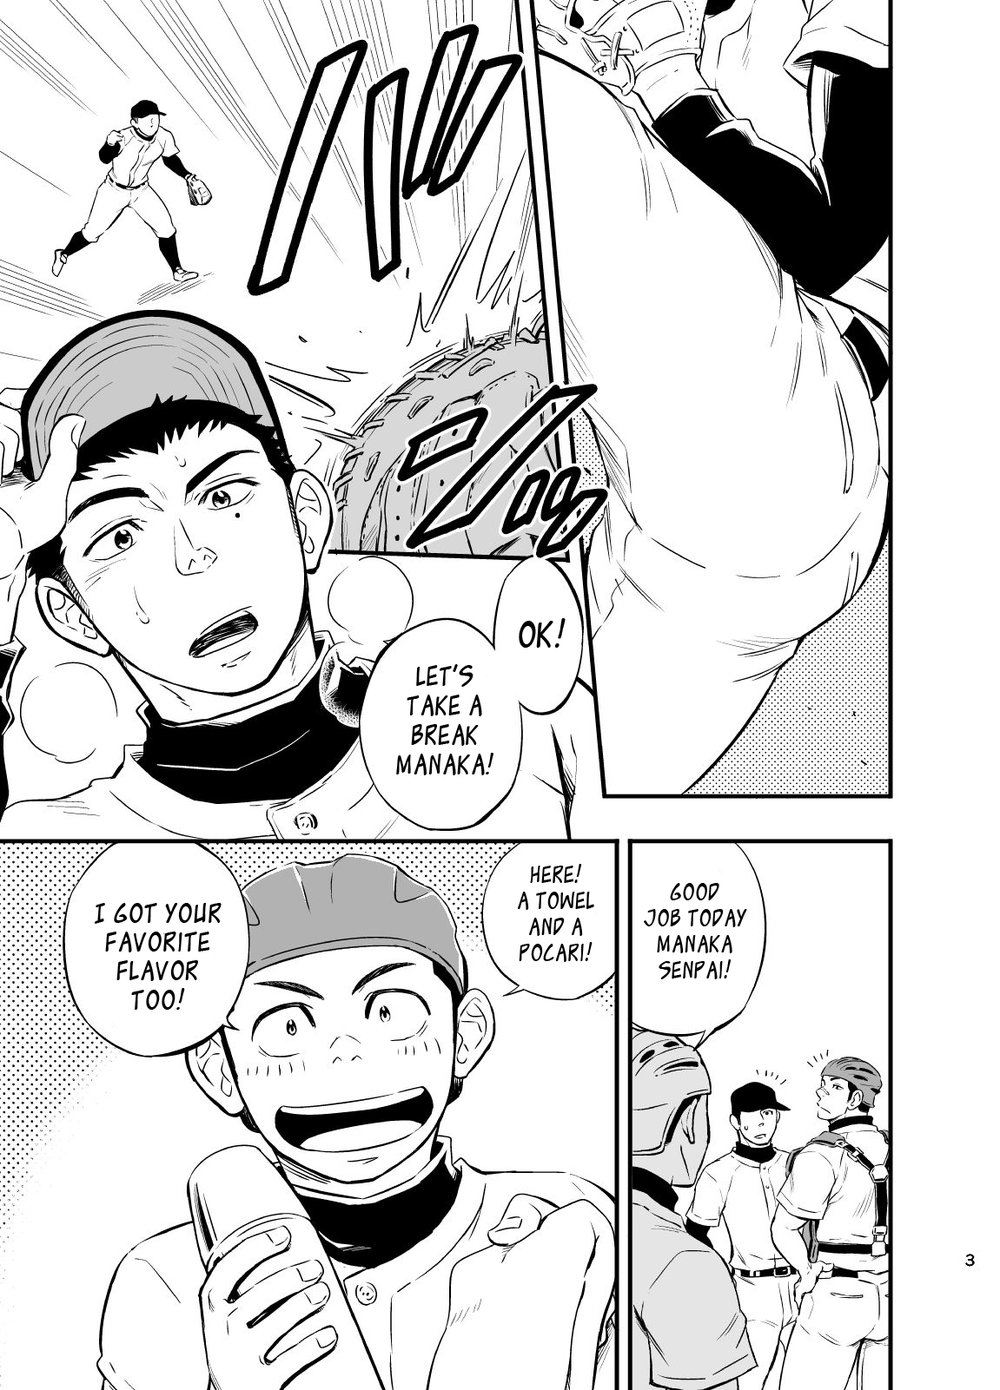 D-Raw2 土狼弍 Draw Two There Definitely is Something Wrong with this Baseball Club Training Camp